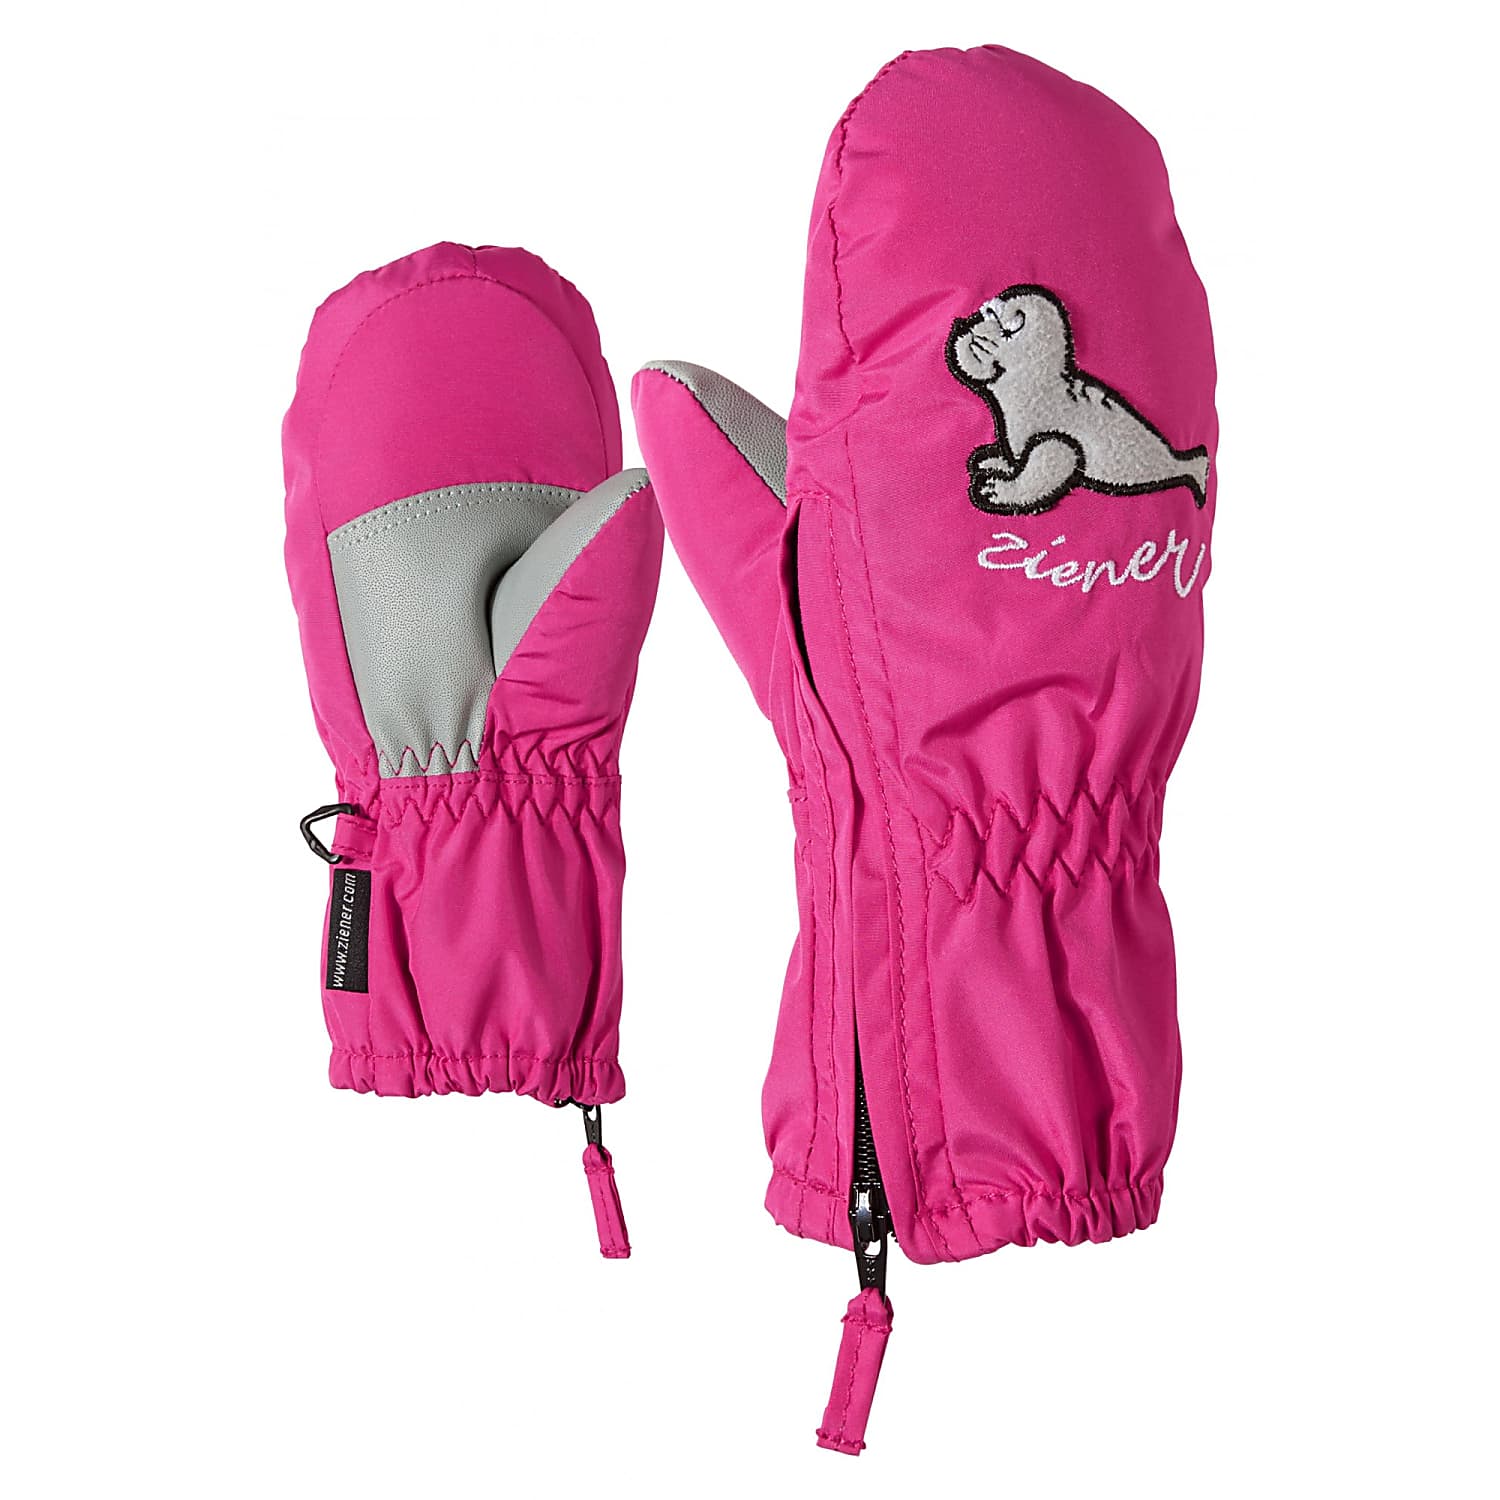 and shipping MINIS Ziener Fast LE MITTEN, TODDLER cheap ZOO Pop Pink -